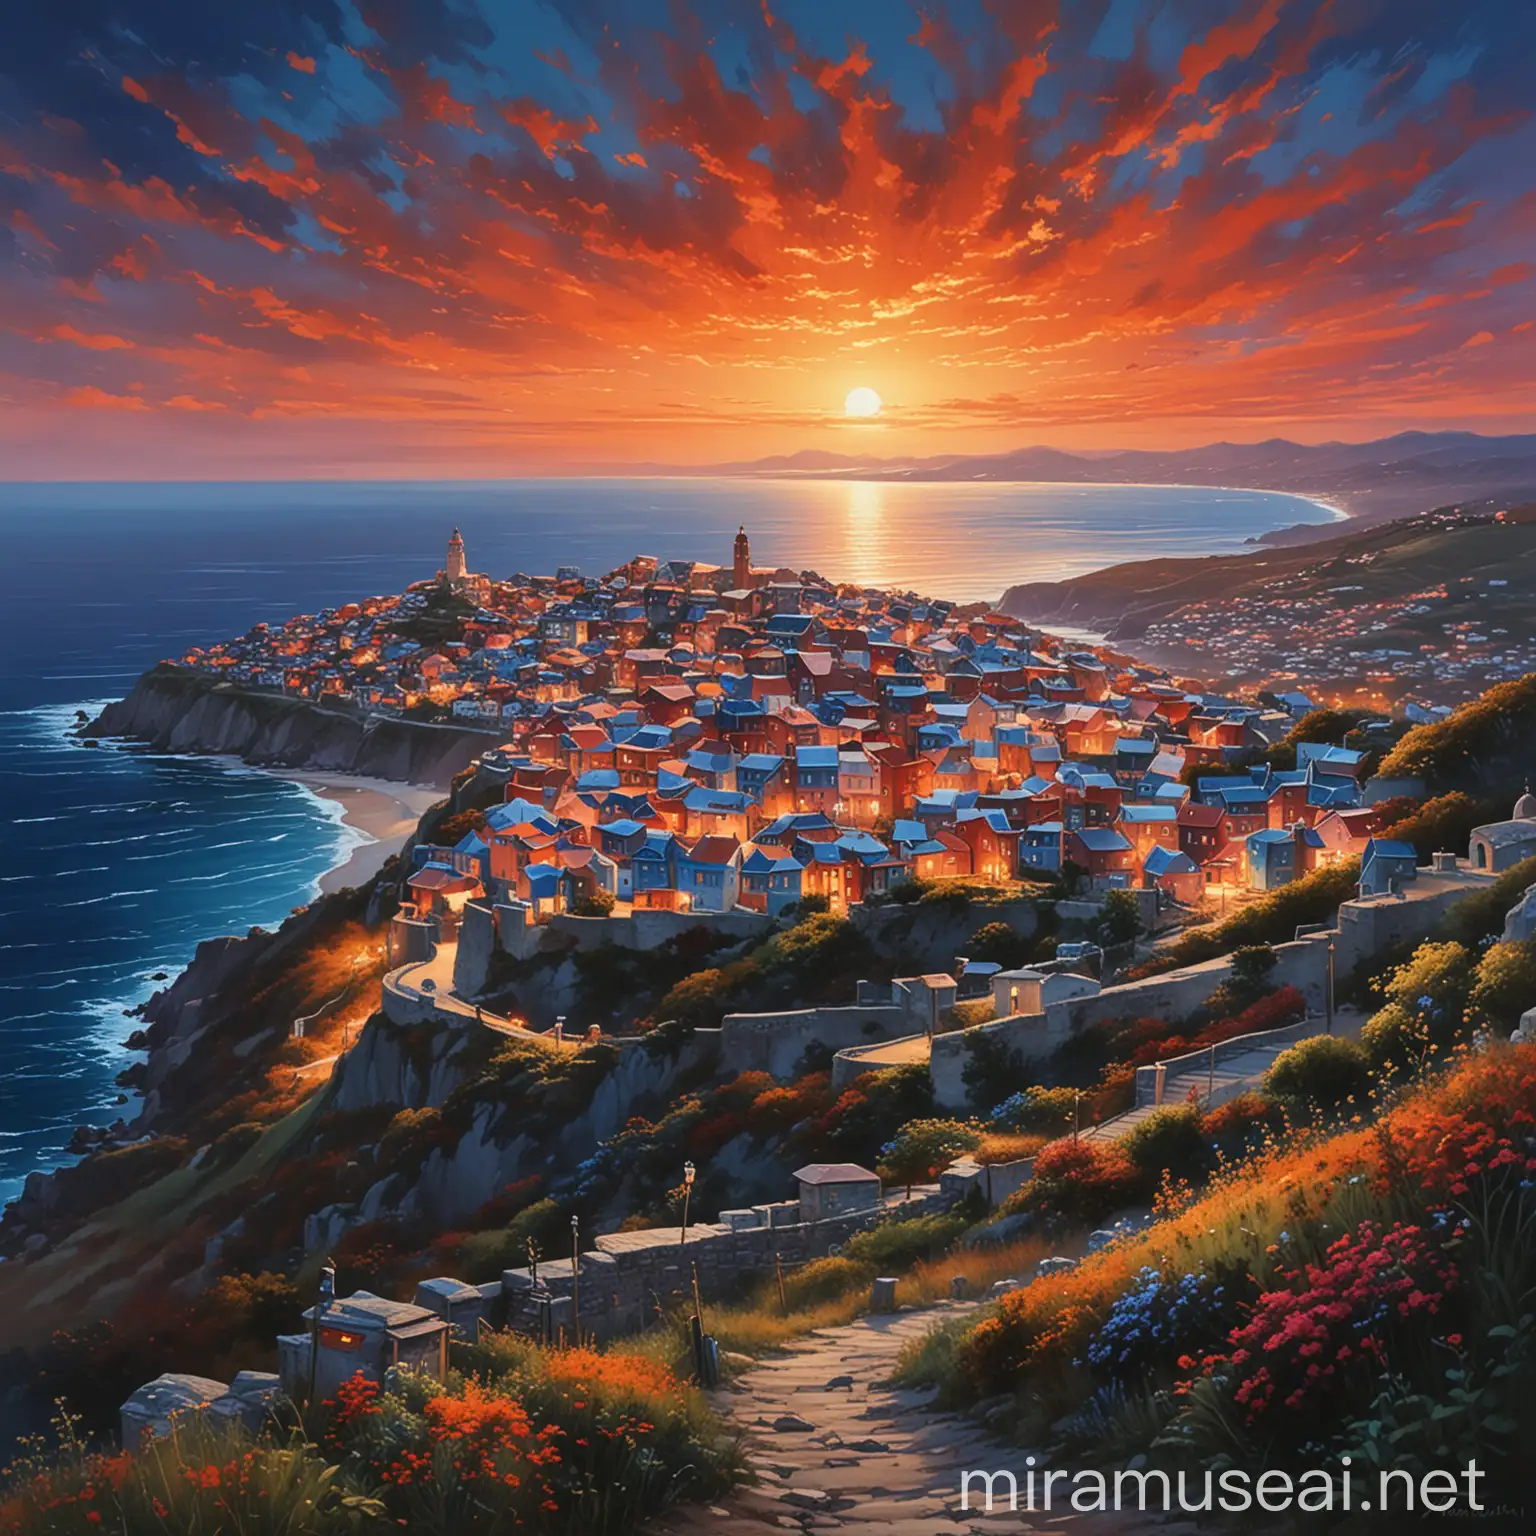 Scenic Hilltop Overlooking Village and Ocean at Sunset